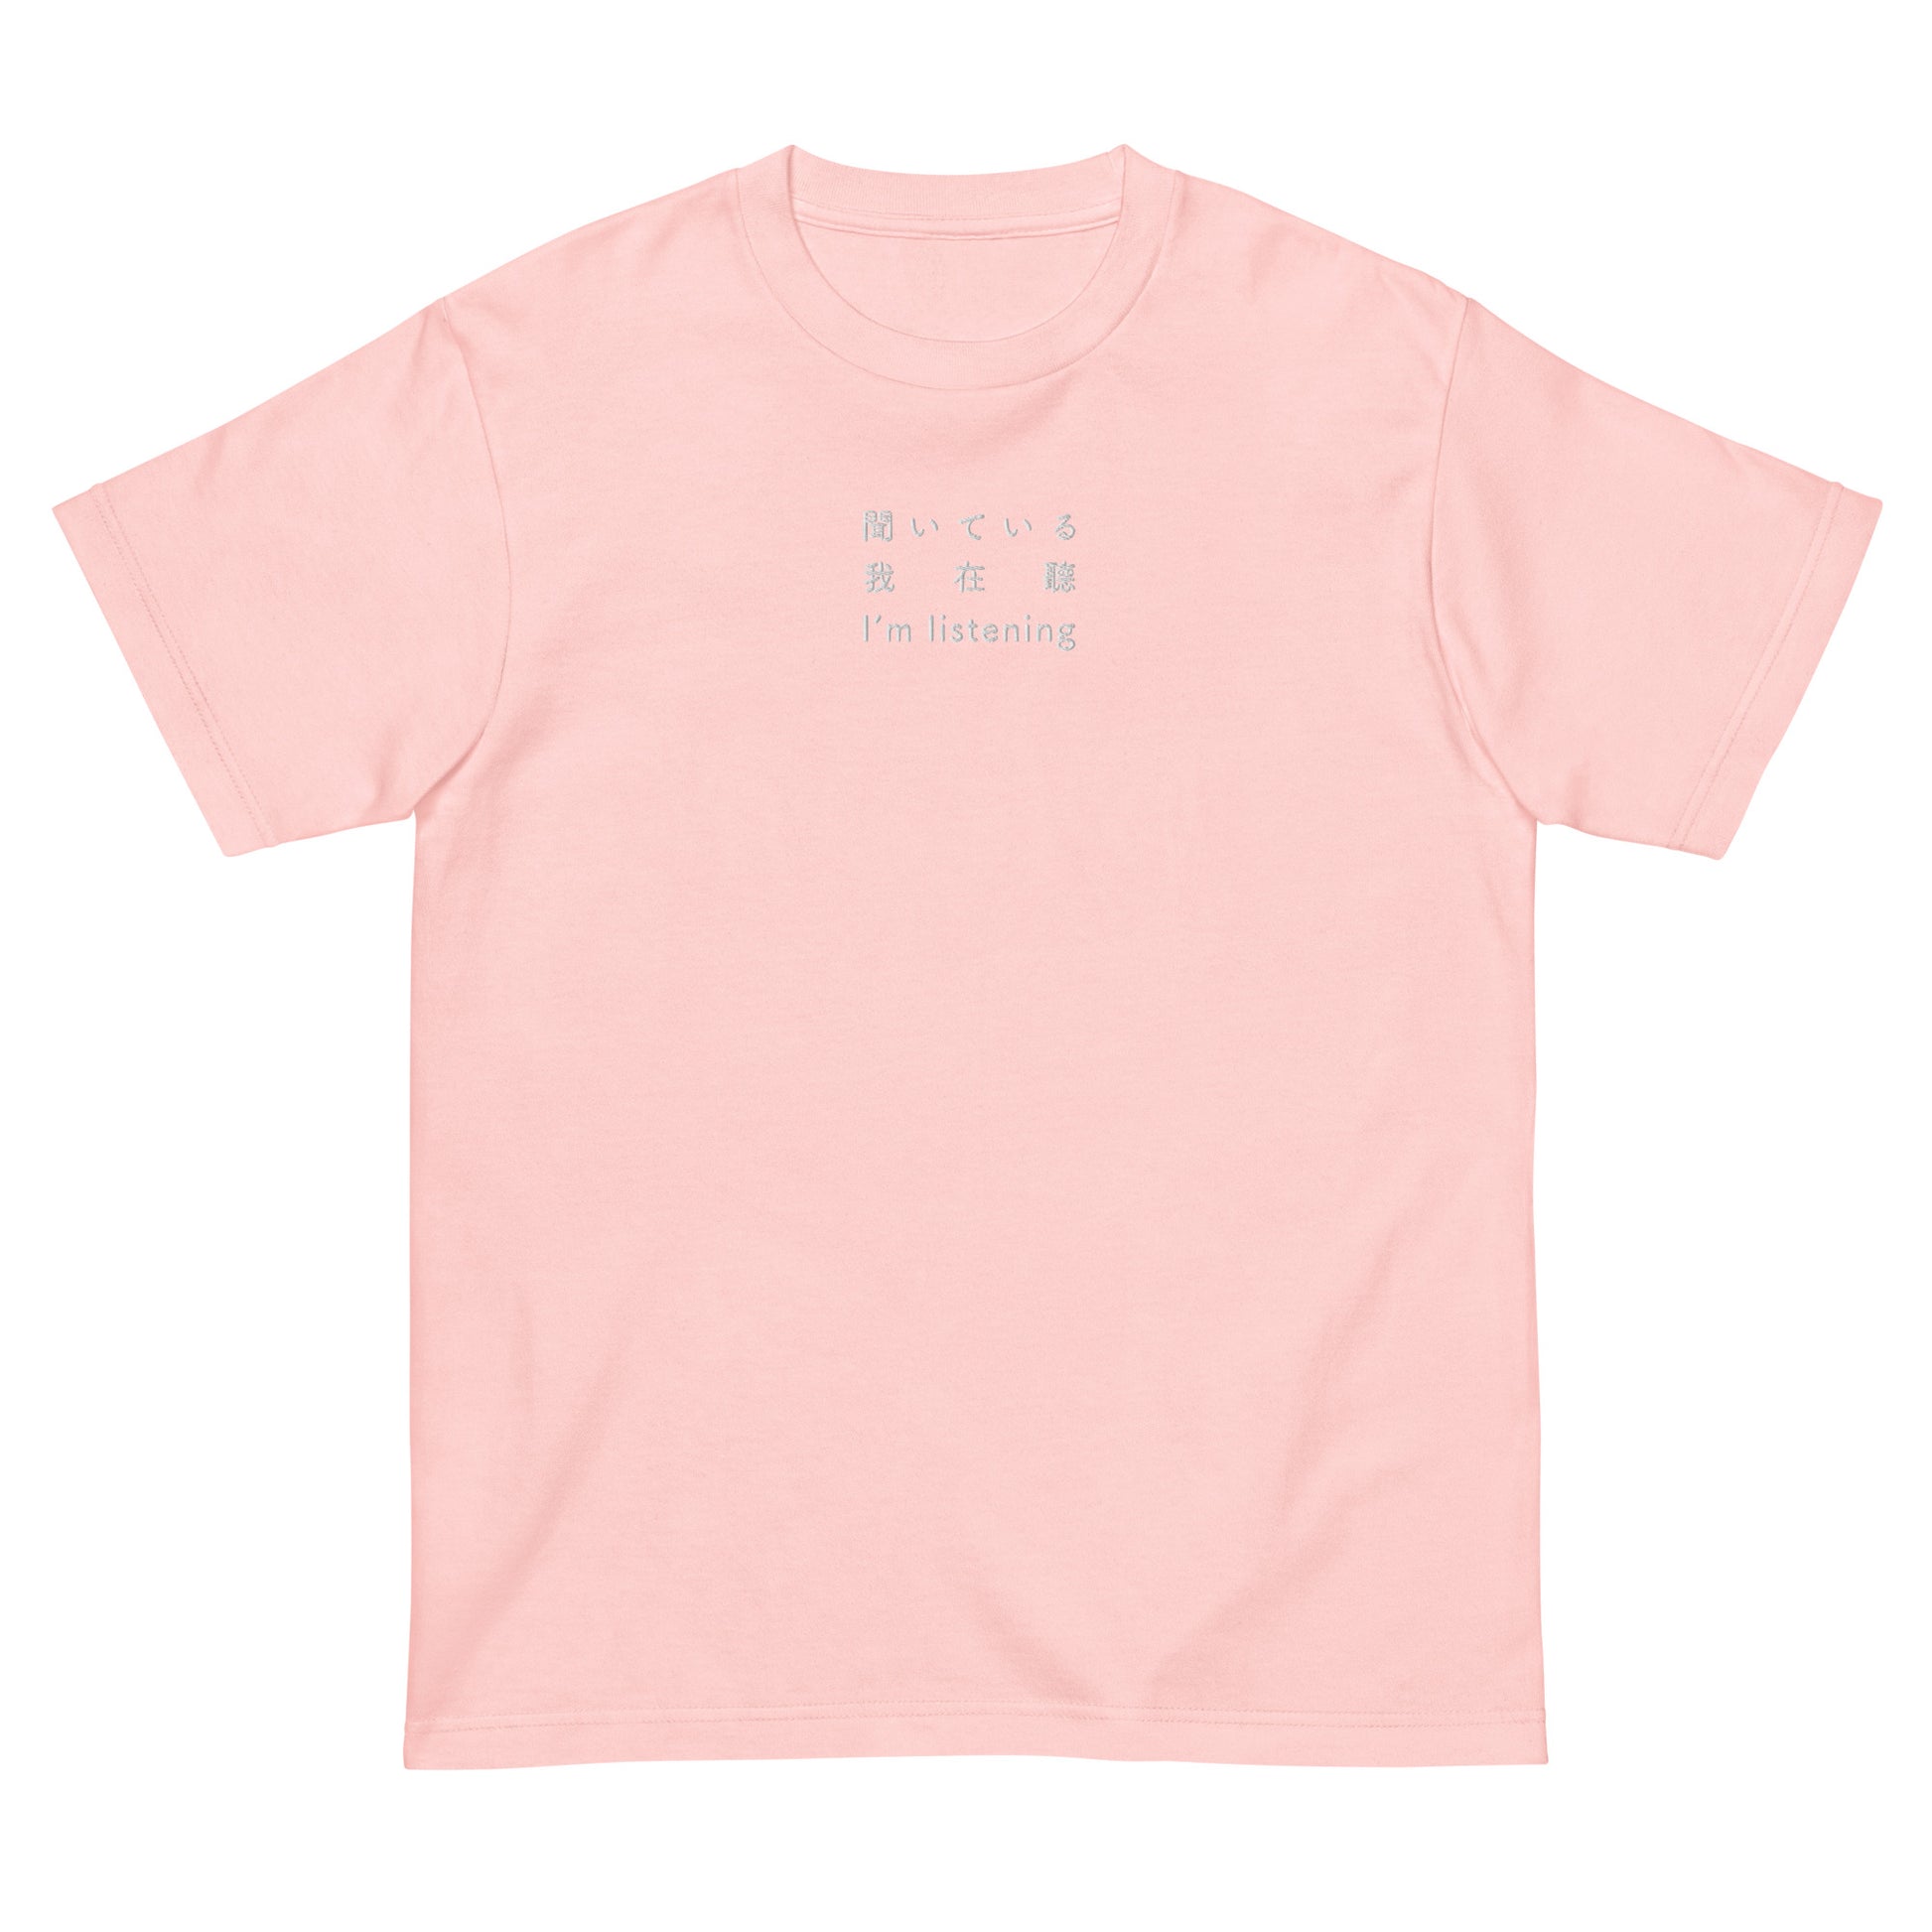 Pink High Quality Tee - Front Design with an White Embroidery "I'm listening" in Japanese,Chinese and English